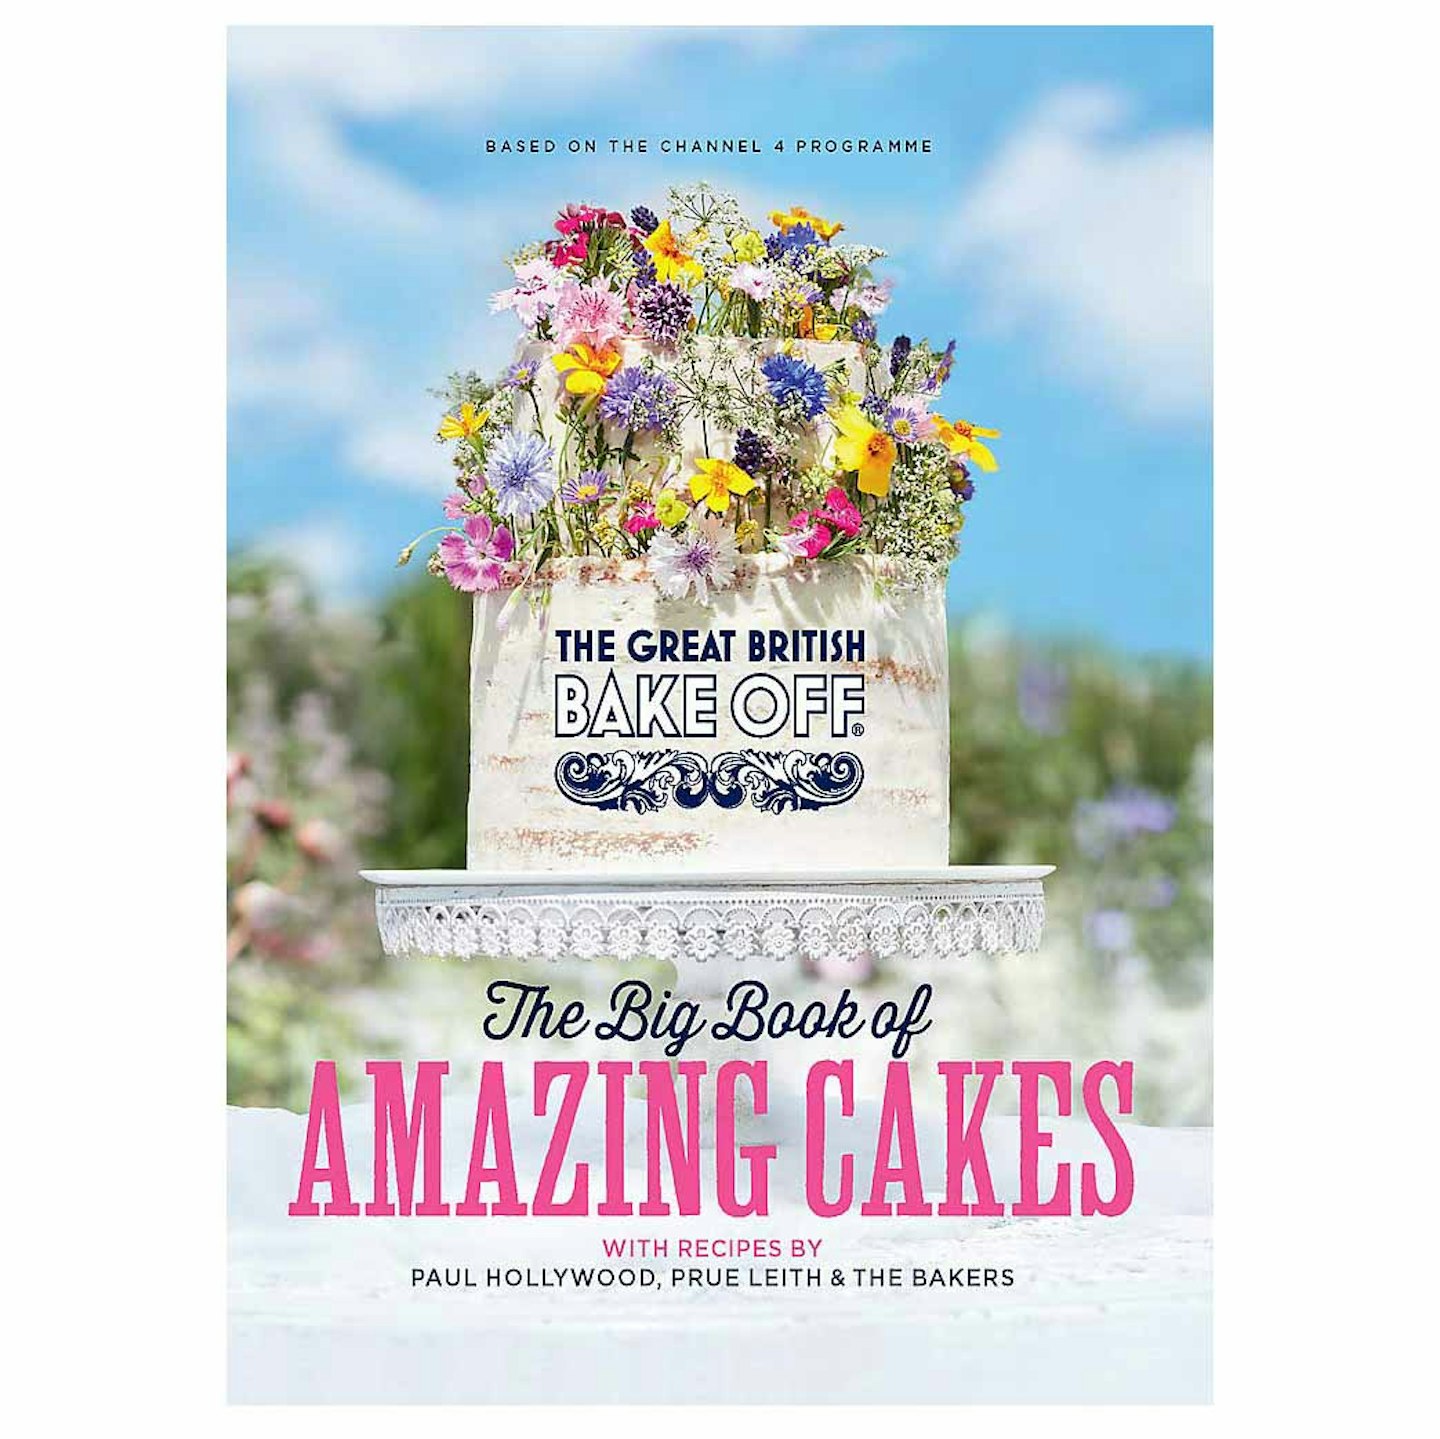 The Great British Bake Off: The Big Book of Amazing Cakes